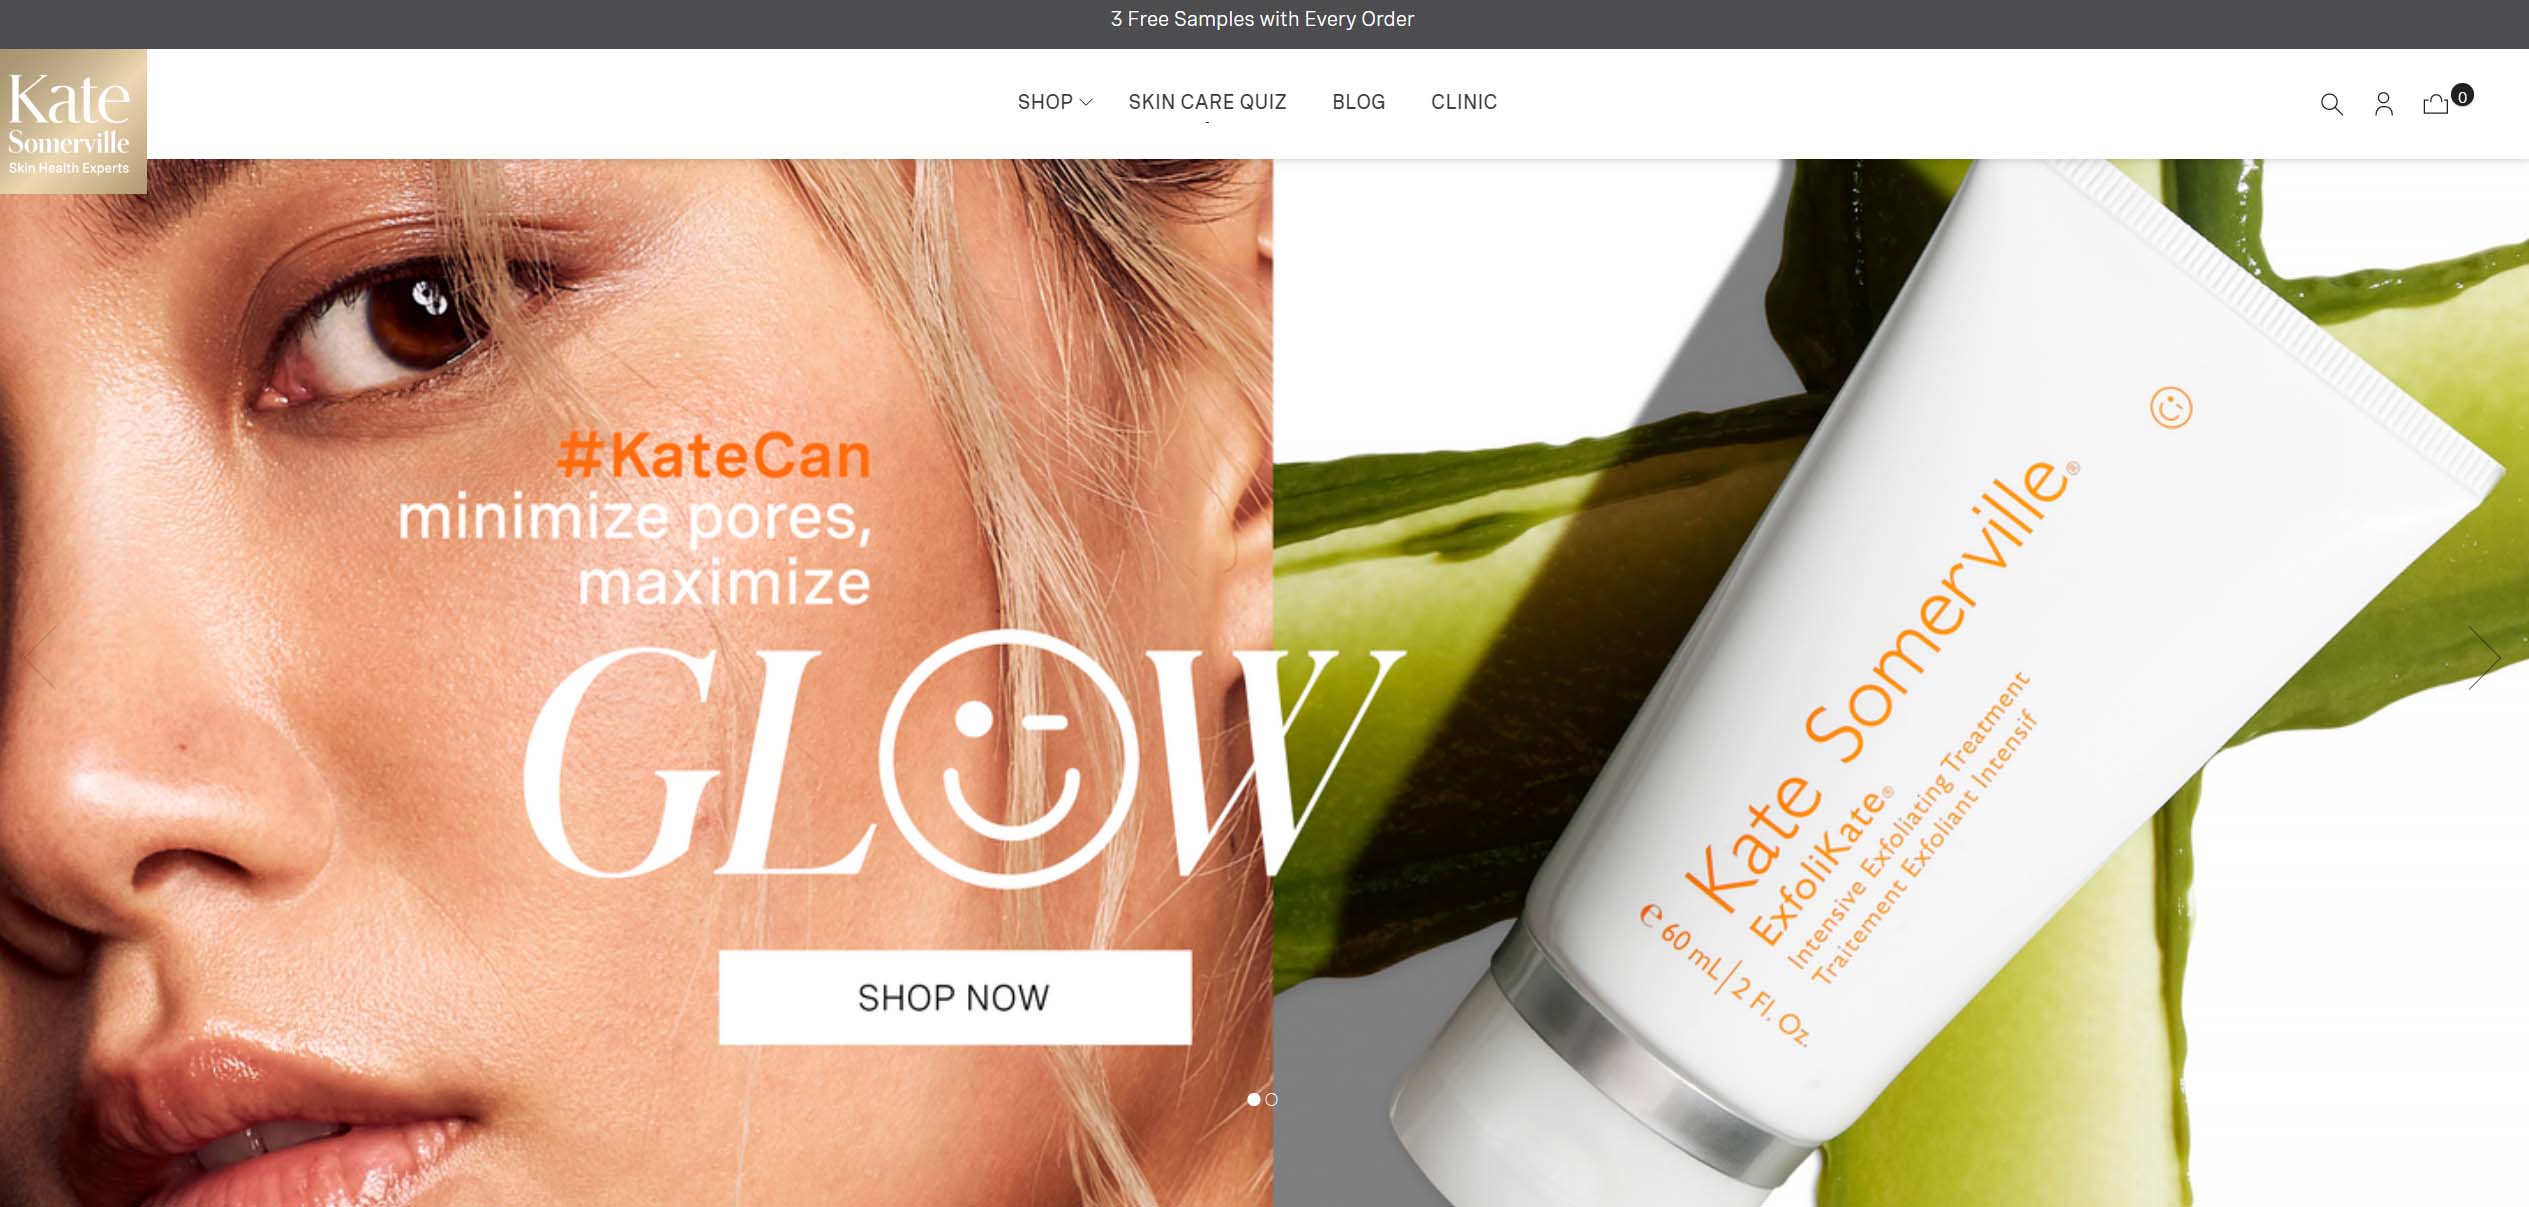 New offer launched: Kate Somerville Affiliate Program